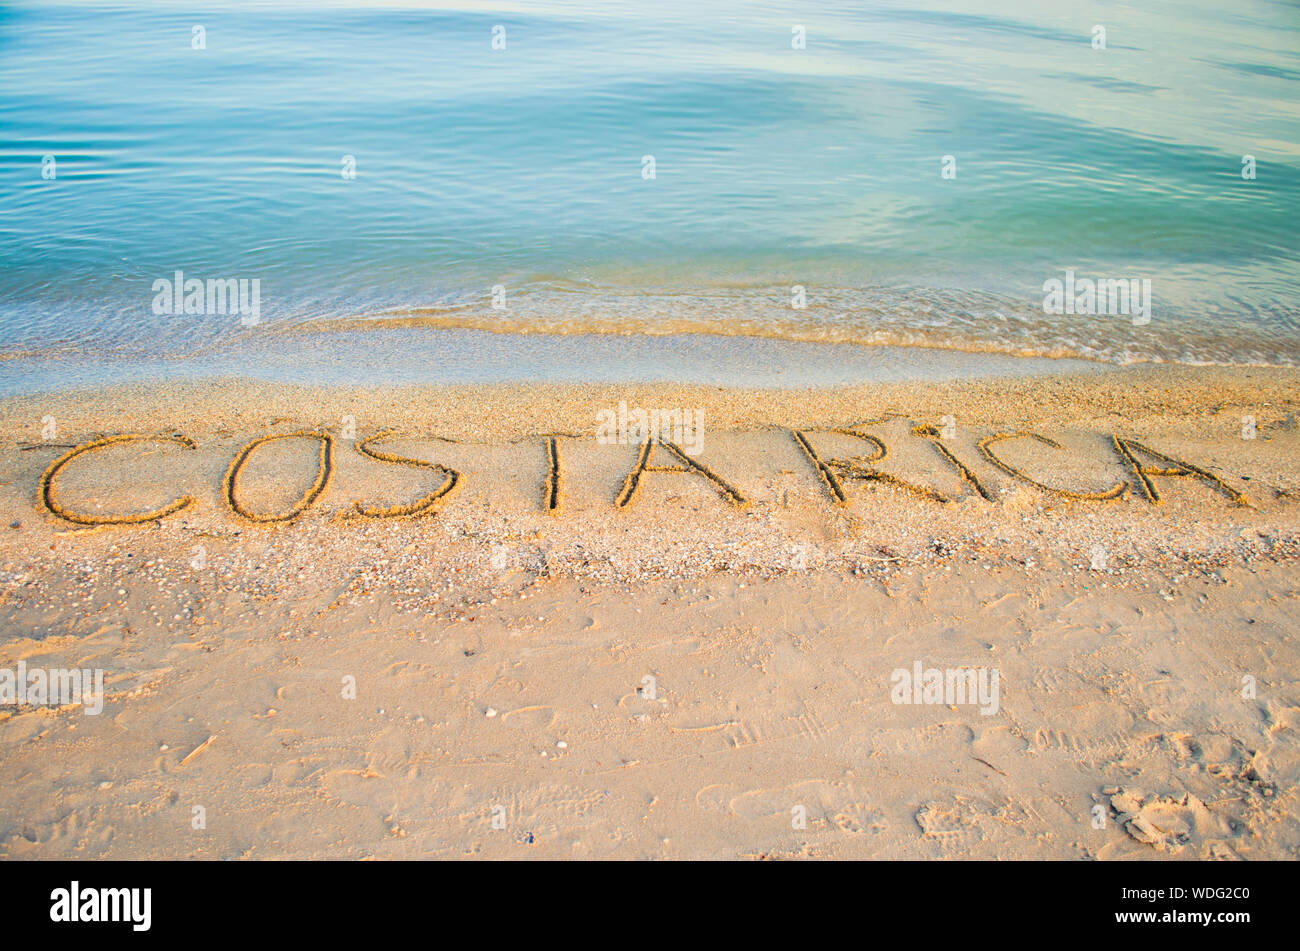 Costarica Text On Sea Shore Against Clear Sky Stock Photo